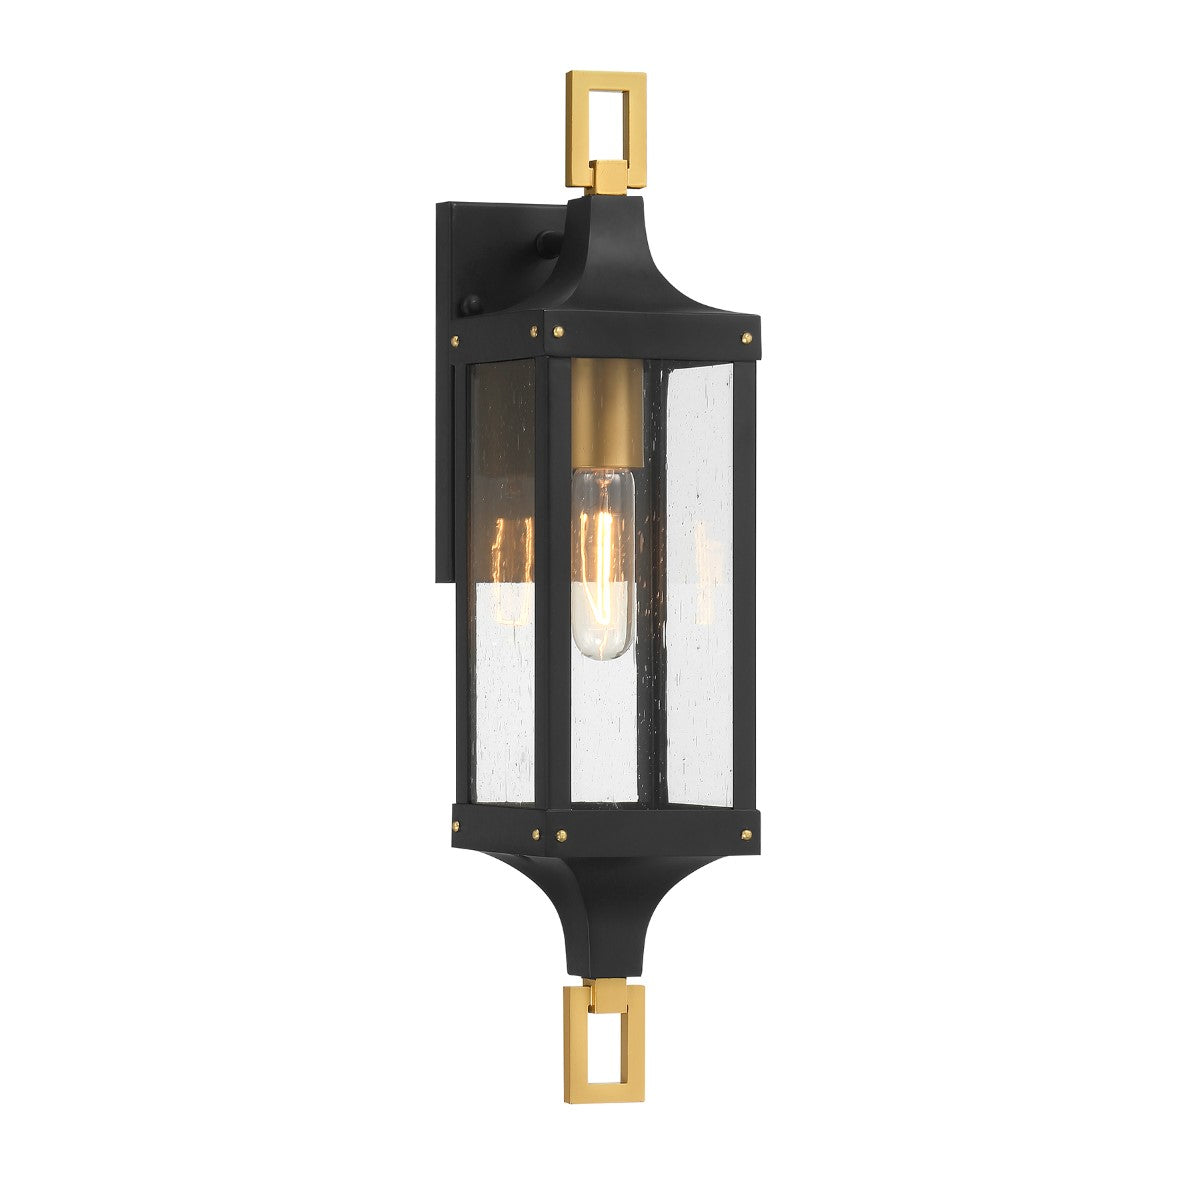 Glendale 21 in. Outdoor Wall Lantern Matte Black and Weathered Brushed Brass Finish